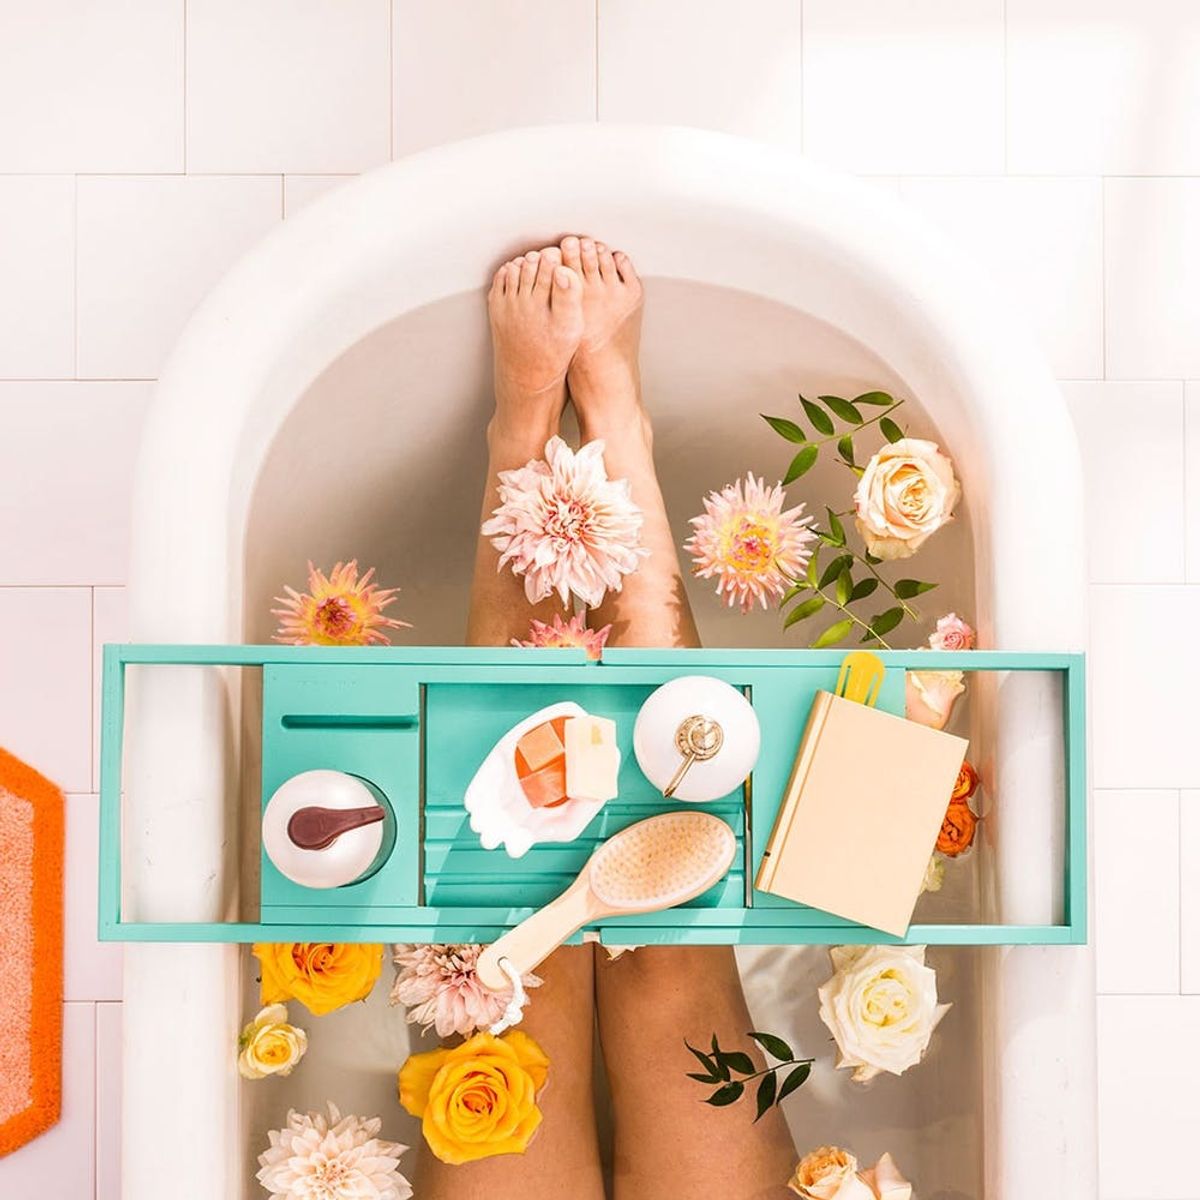 Meet the Flower Bath That Can Banish Your Winter Blues